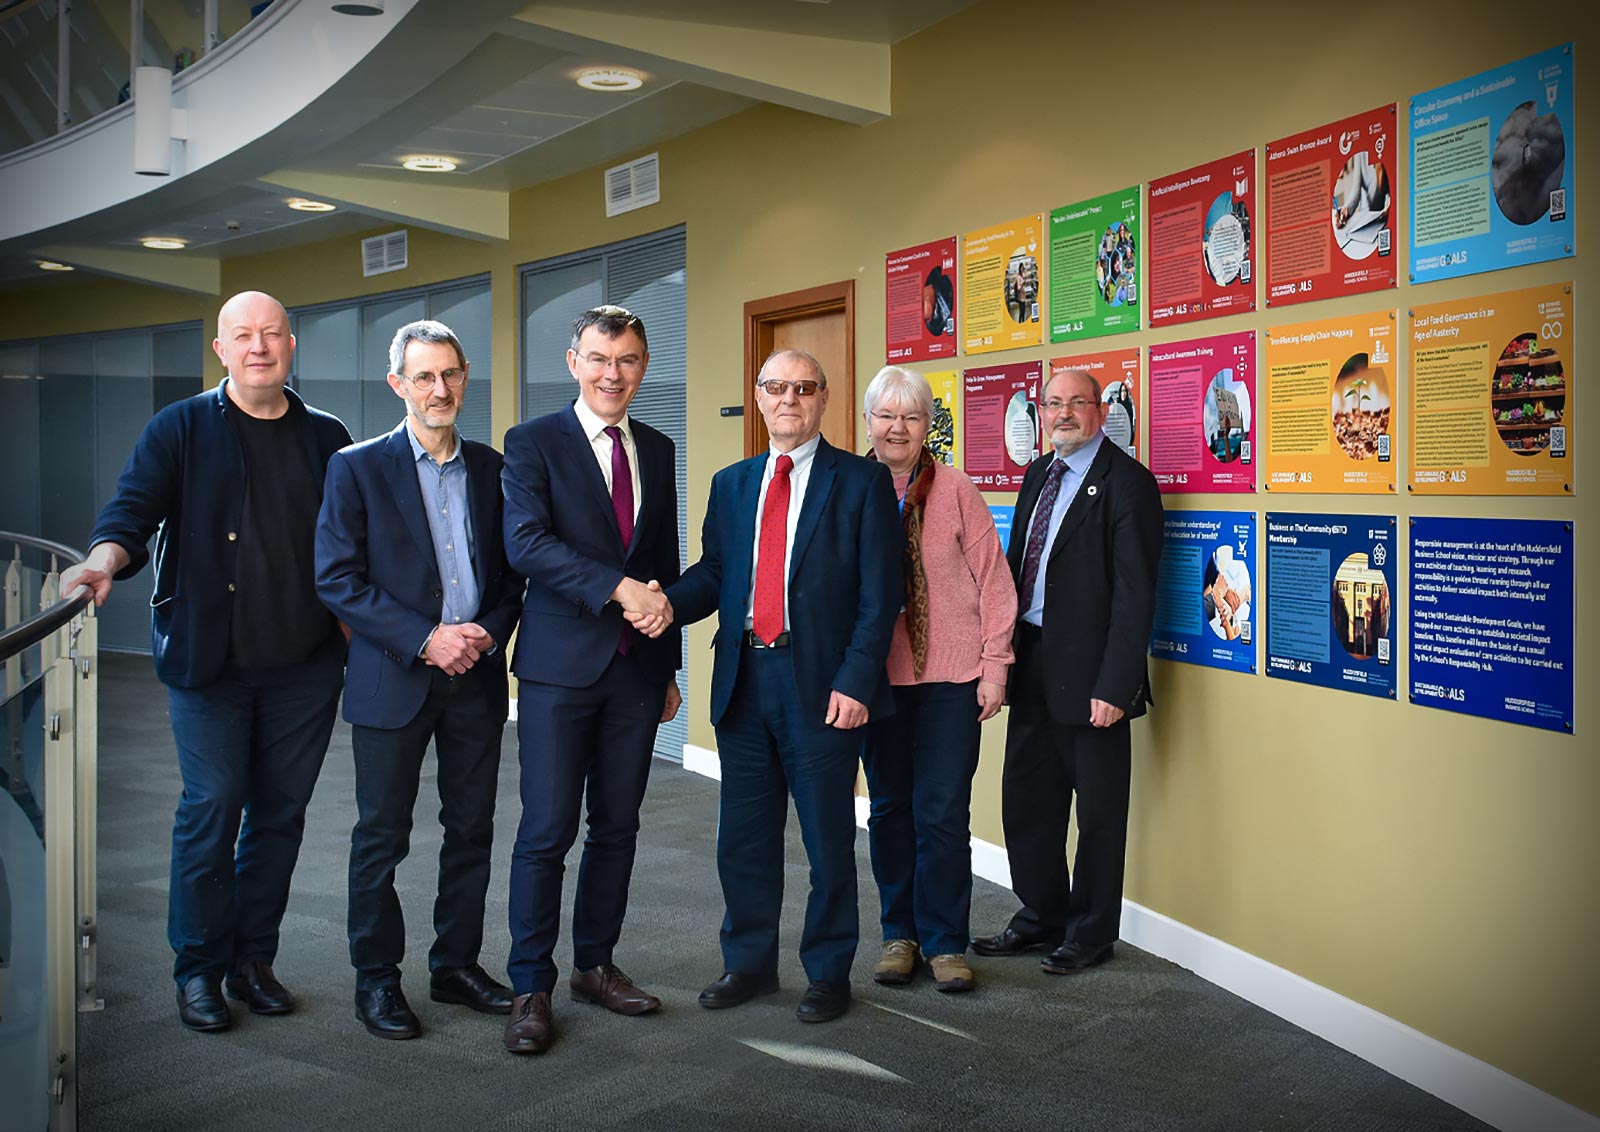 Pictured l-r are John Lever, Chris Herring, Tim Thornton, Peter Roberts, Liz Towns-Andrews and Gideon Richards